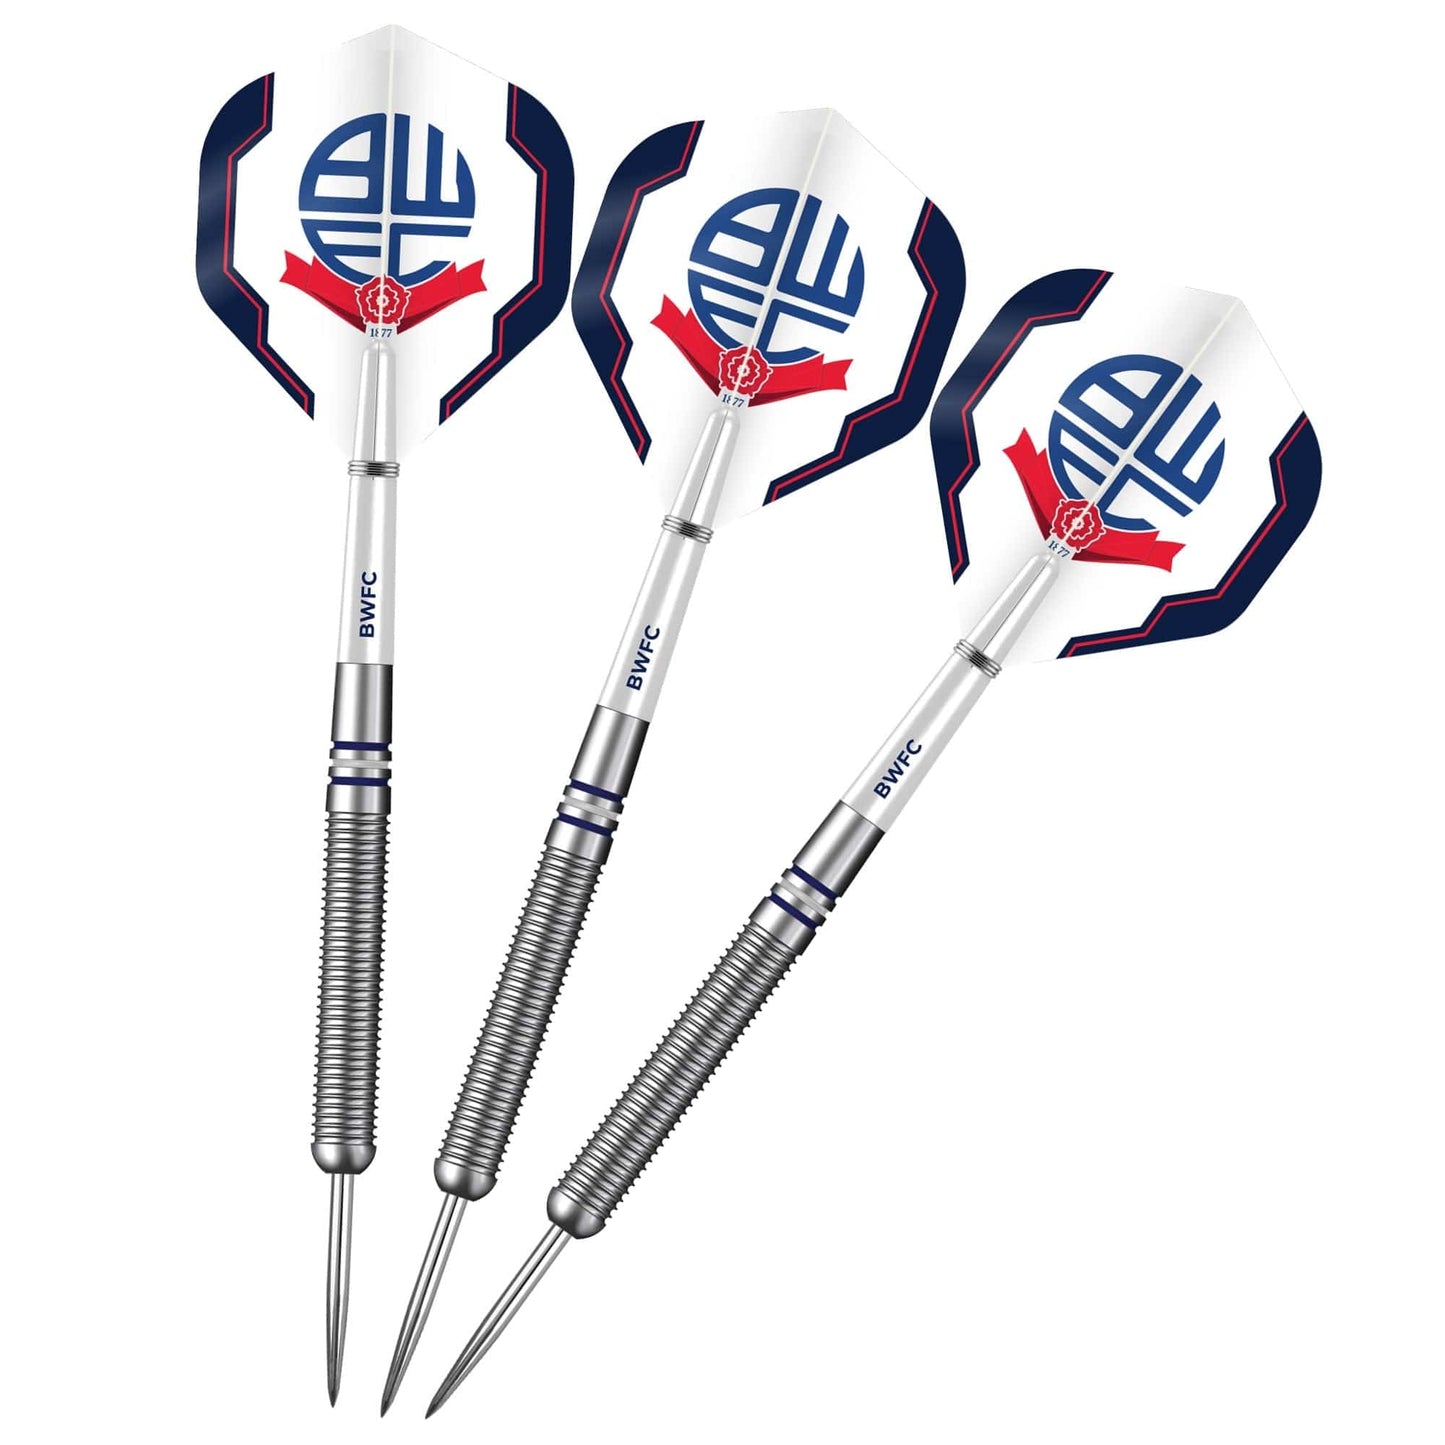 Bolton Wanderers Darts - Steel Tip Tungsten - Official Licensed - BWFC - 24g